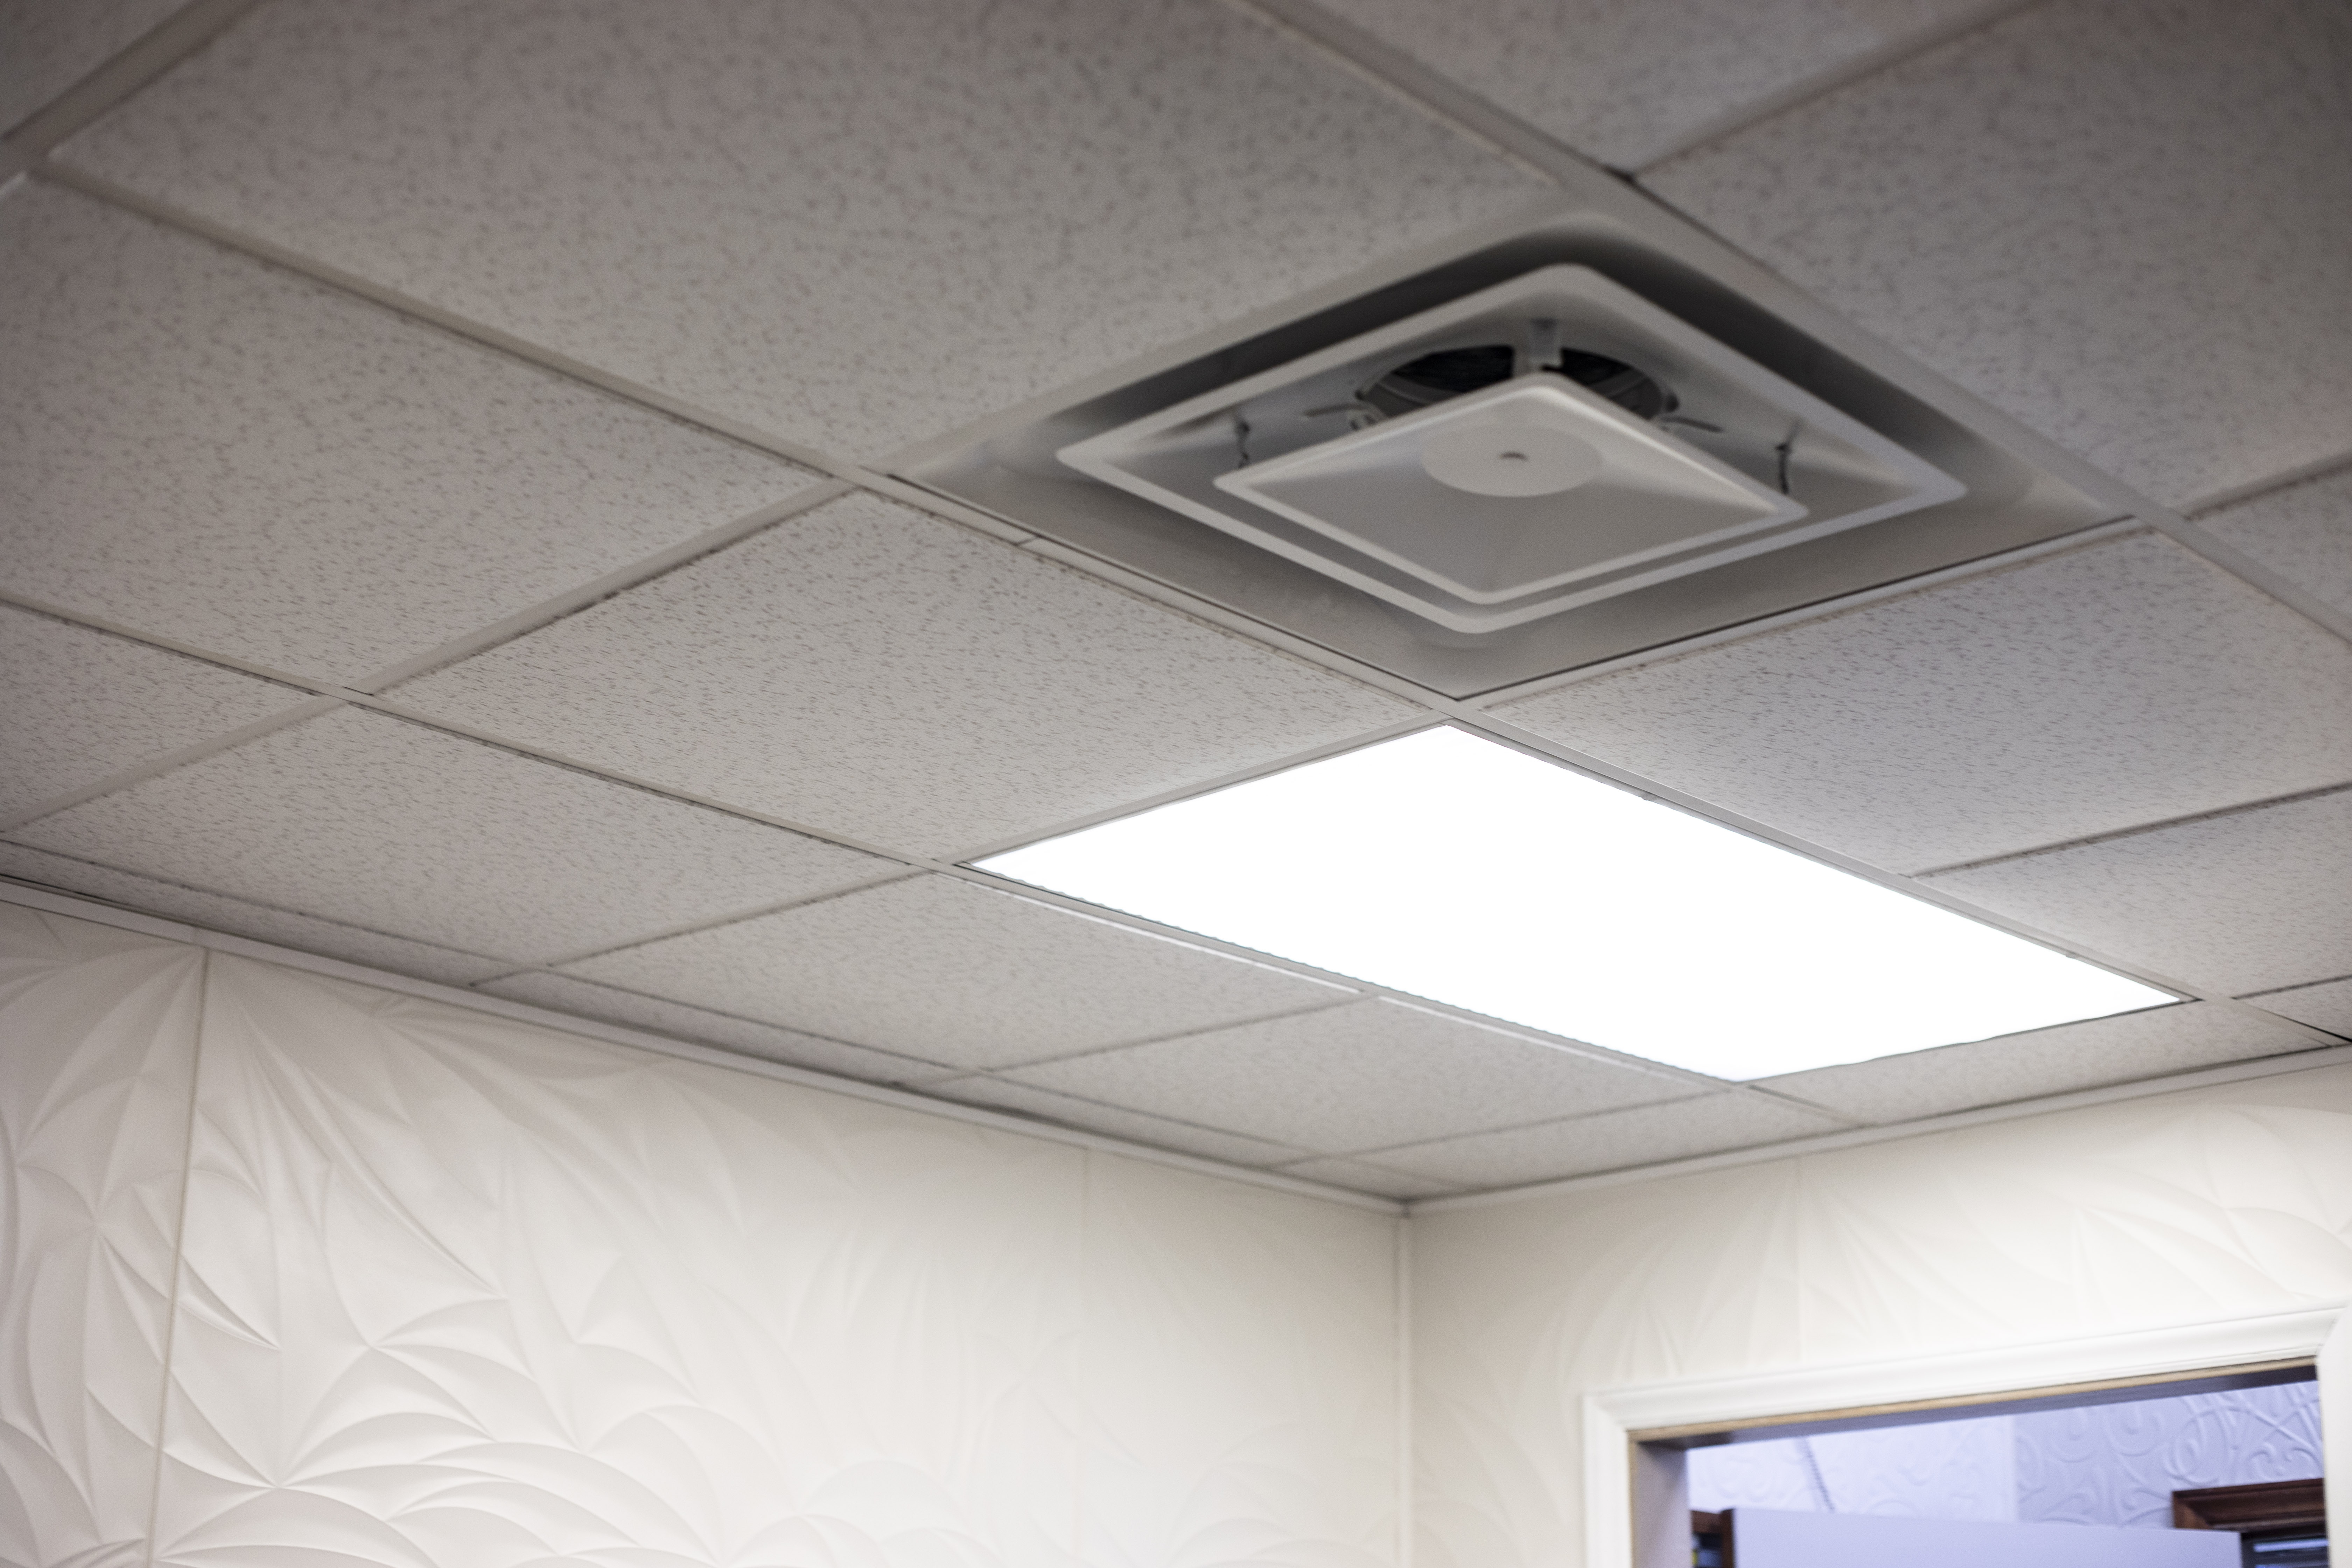 Ati S New Lightweight Ceiling Tiles Ready To Compete With Industry